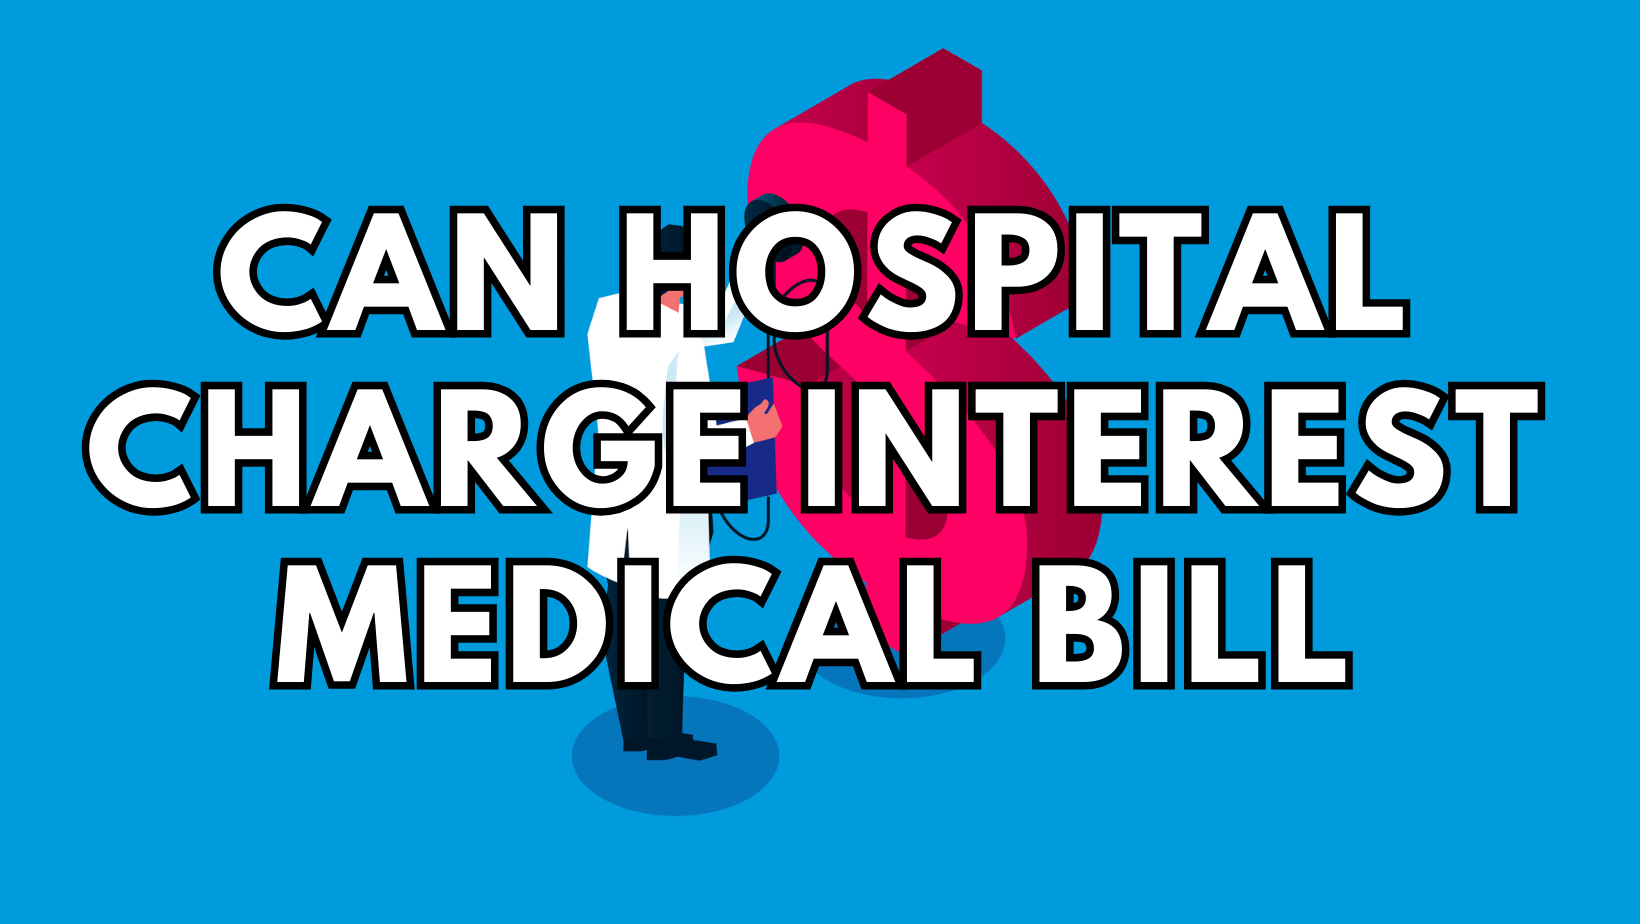 can hospital charge interest on medical bills